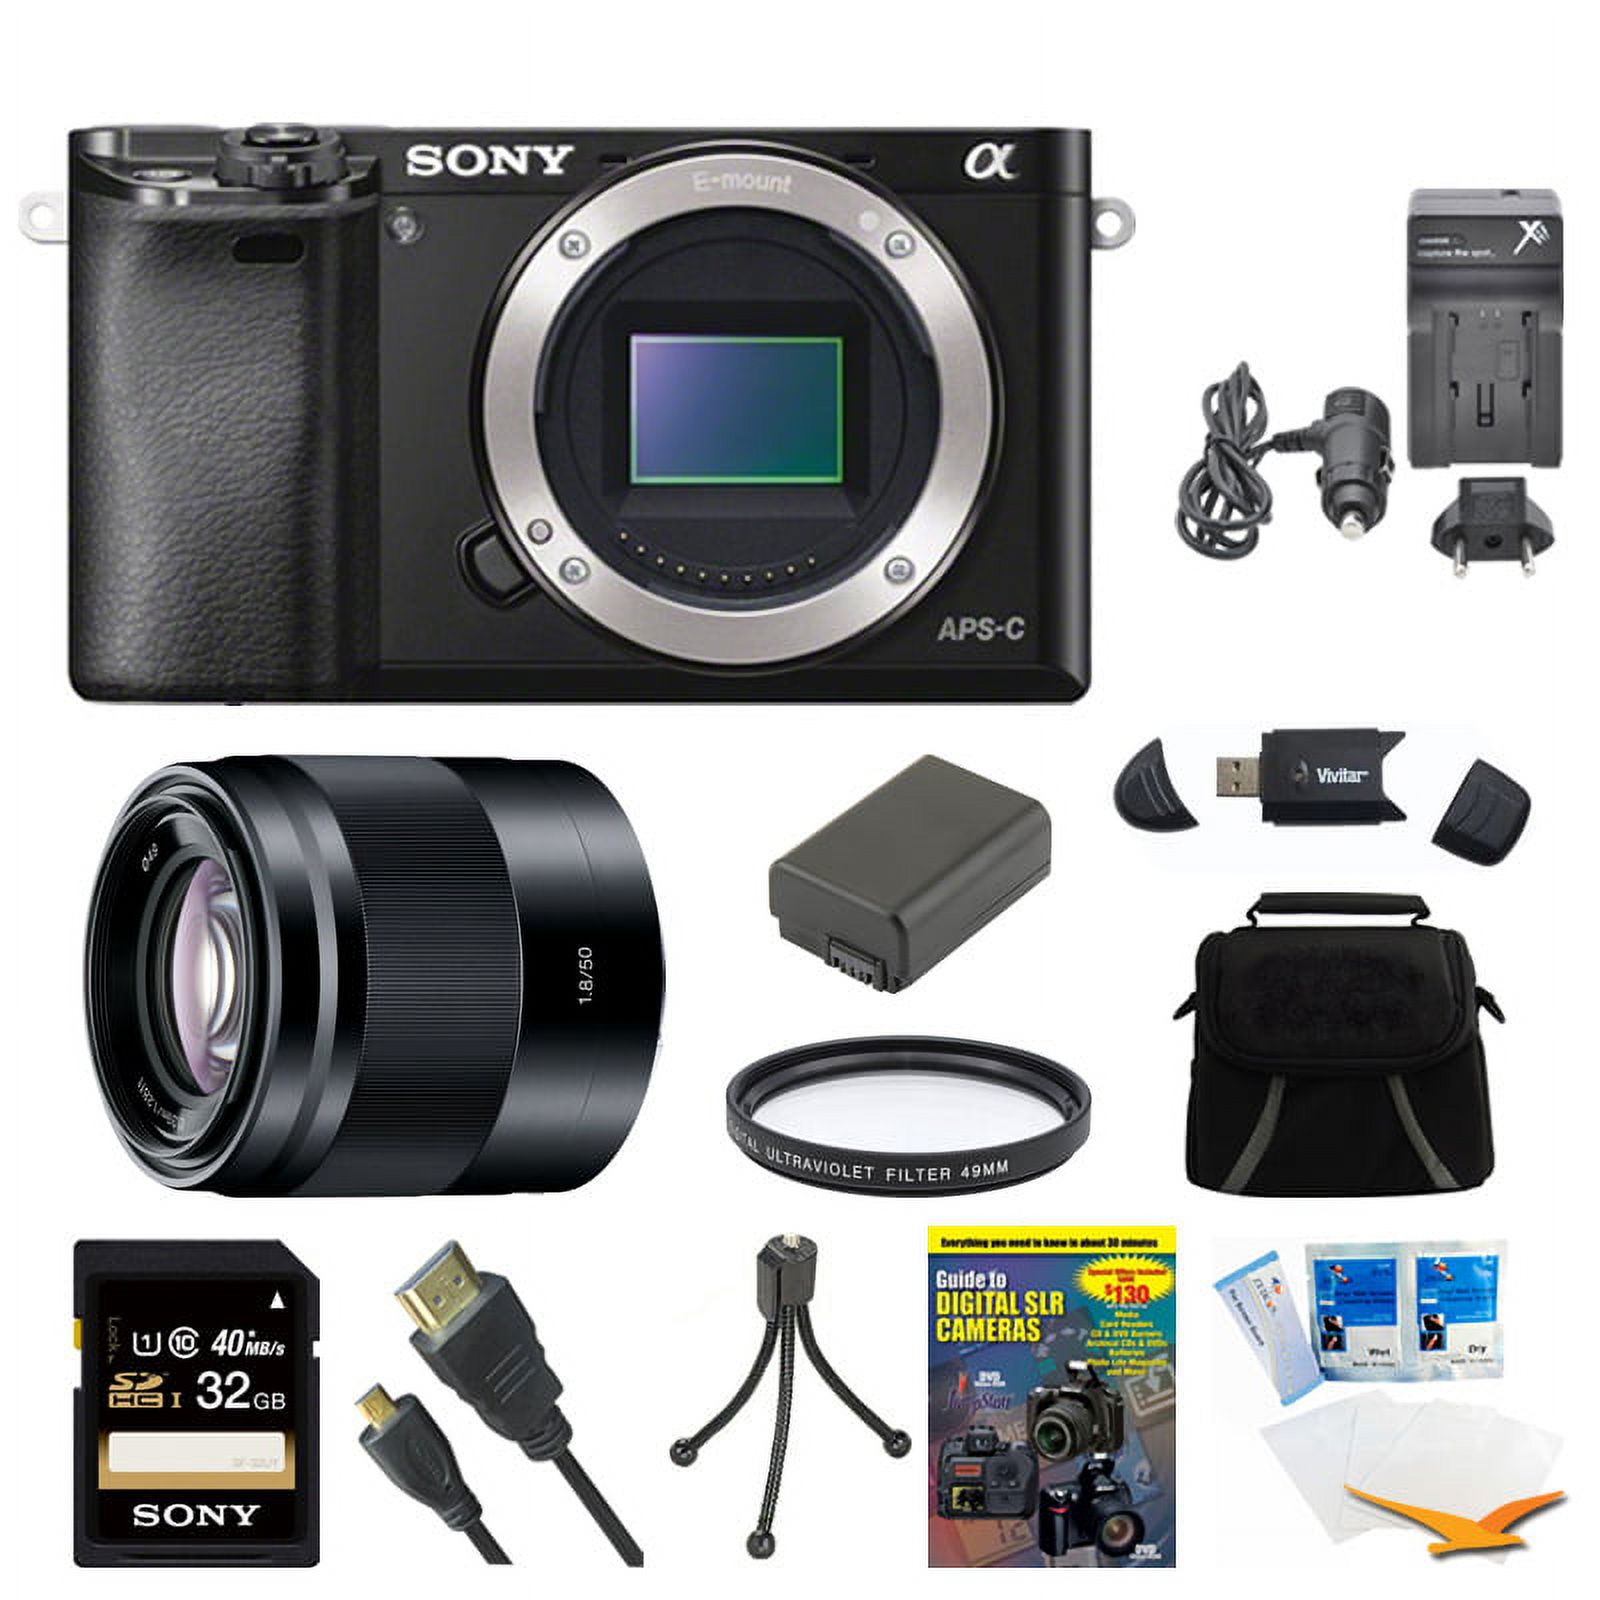 Sony Alpha a6000 Black Camera with 16-50mm Lens and 32GB Card Bundle - Includes Camera, 50mm Lens, 49mm UV Filter, 32GB SDHC/SDXC Memory Card, Bag, NP-FW50 Battery, Battery Charger, Card Reader, DVD - image 1 of 5